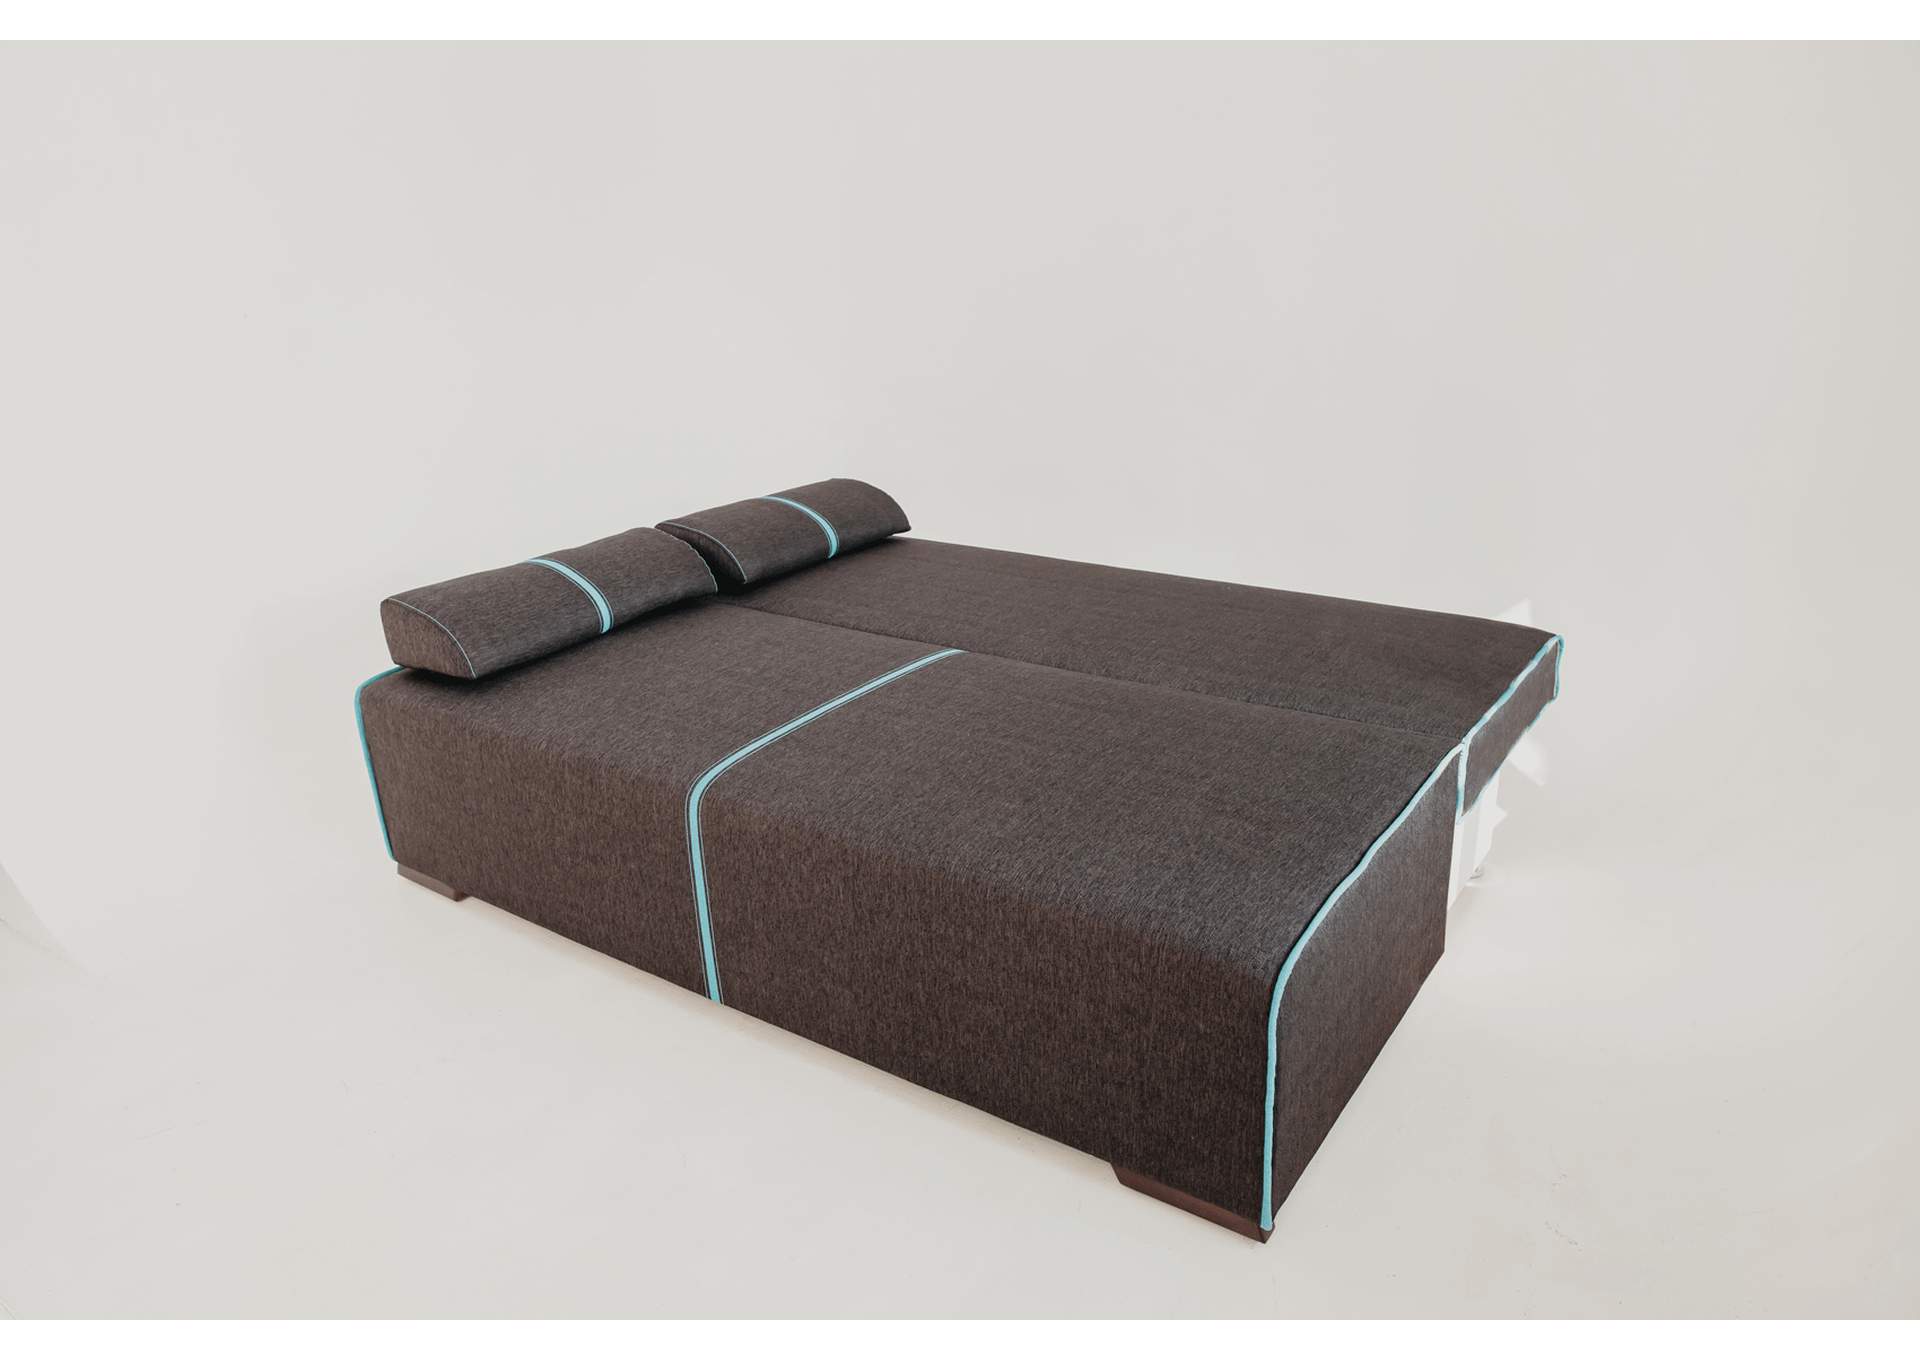 Broadway Sofa Bed,ESF Wholesale Furniture